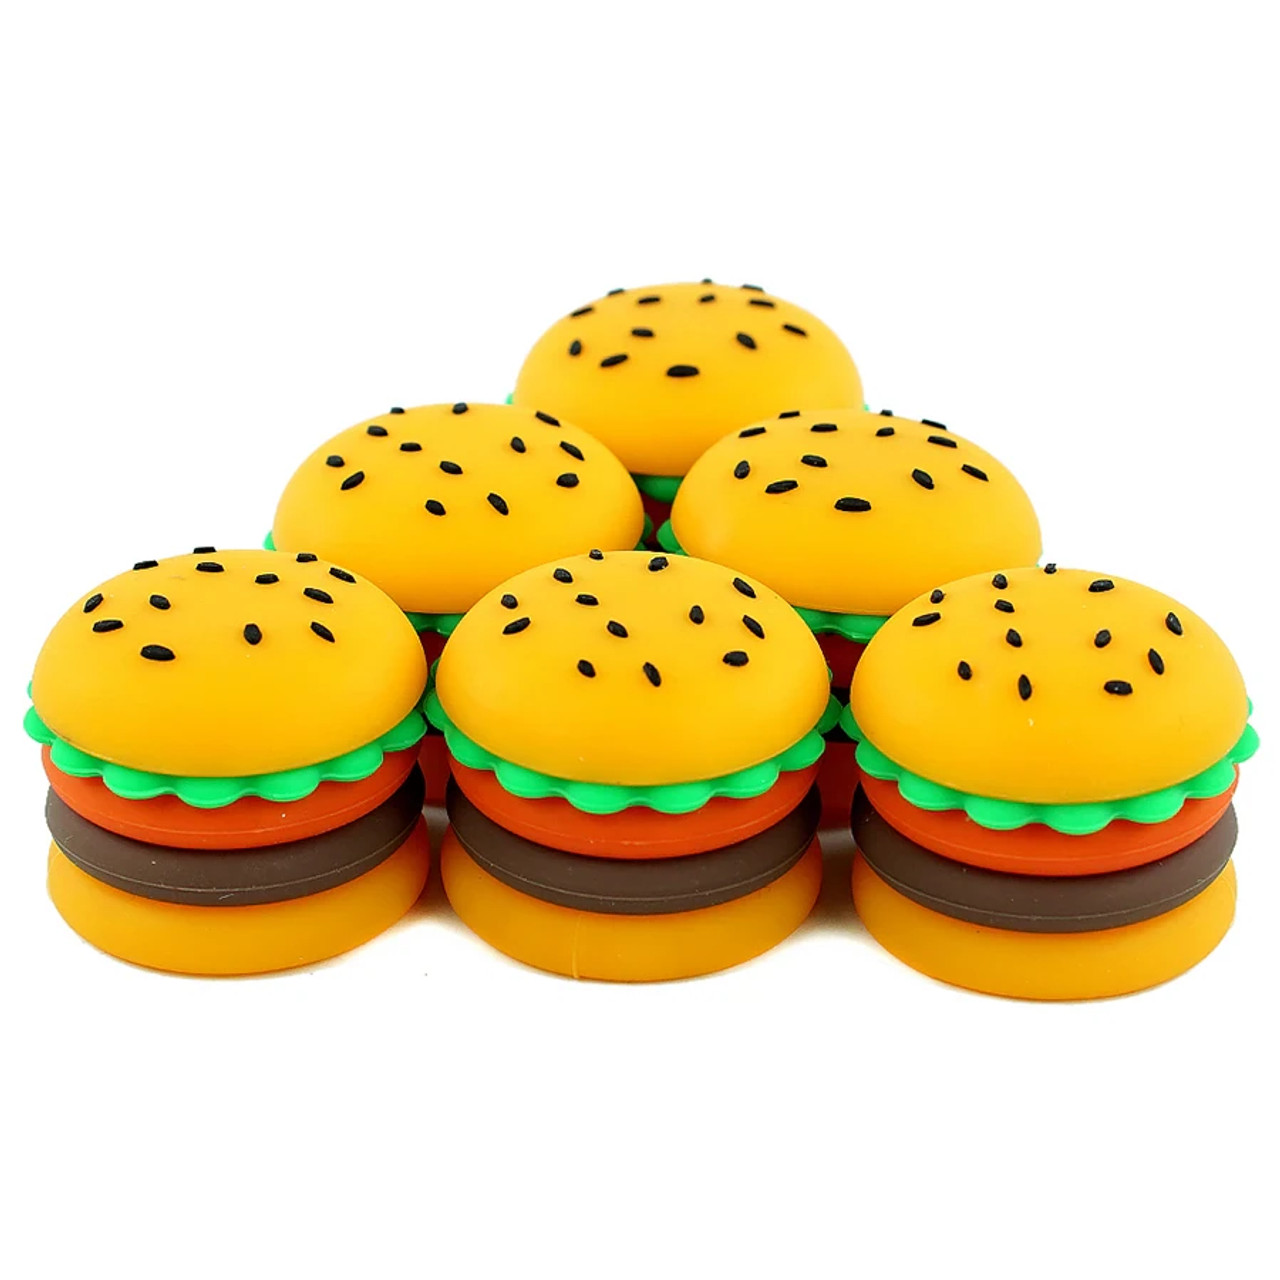  ooDuo 5ml Silicone Containers for Wax 6pcs Non Stick Hamburger  Shape Storage Jars : Arts, Crafts & Sewing